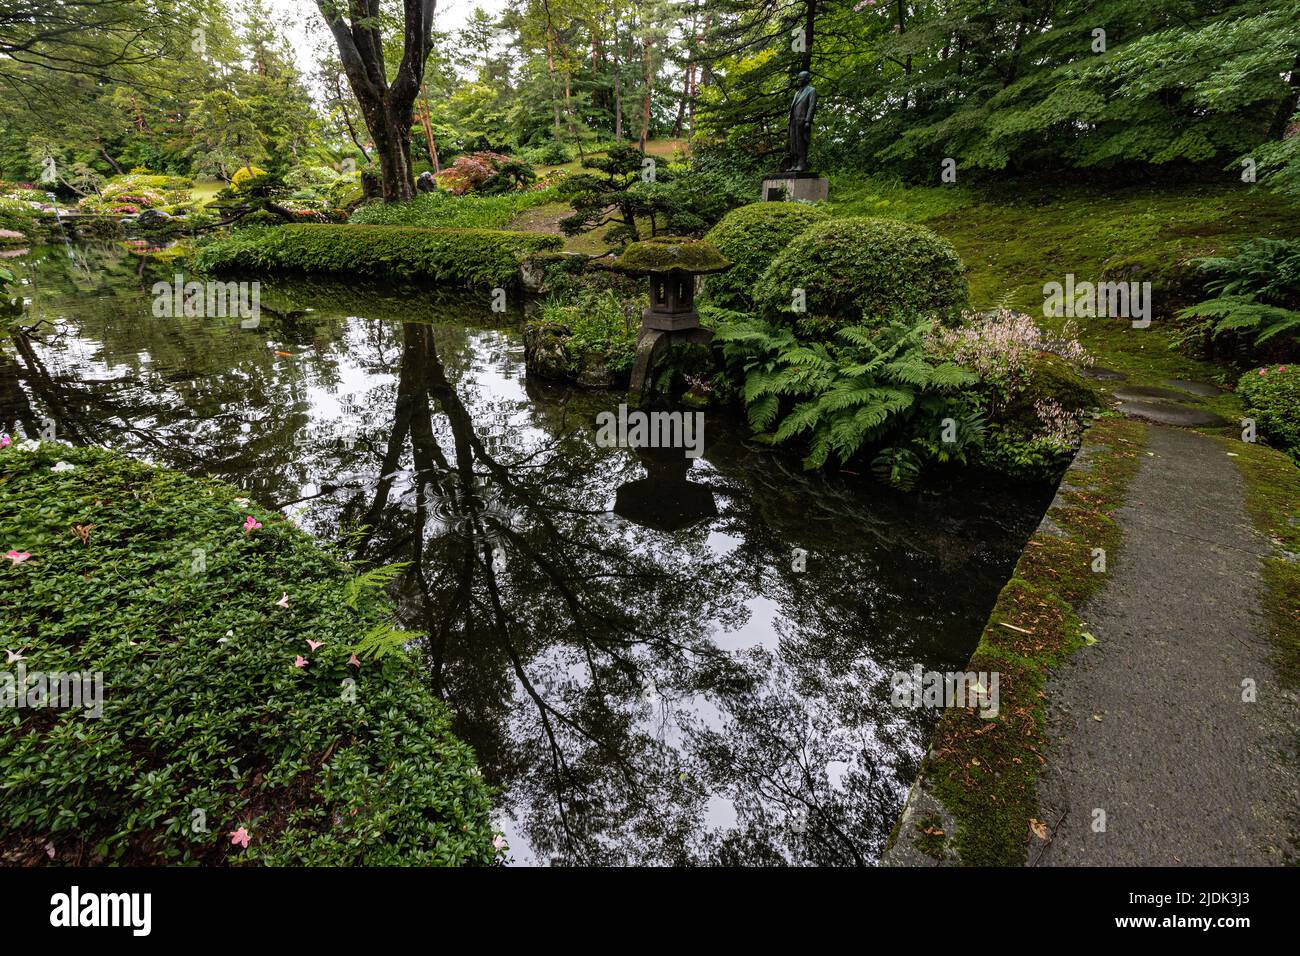 Unrei-an is a Japanese garden found within the compound of Aizu Homare Shuzo Sake distillery.  The garden was created during the Showa period.  This g Stock Photo